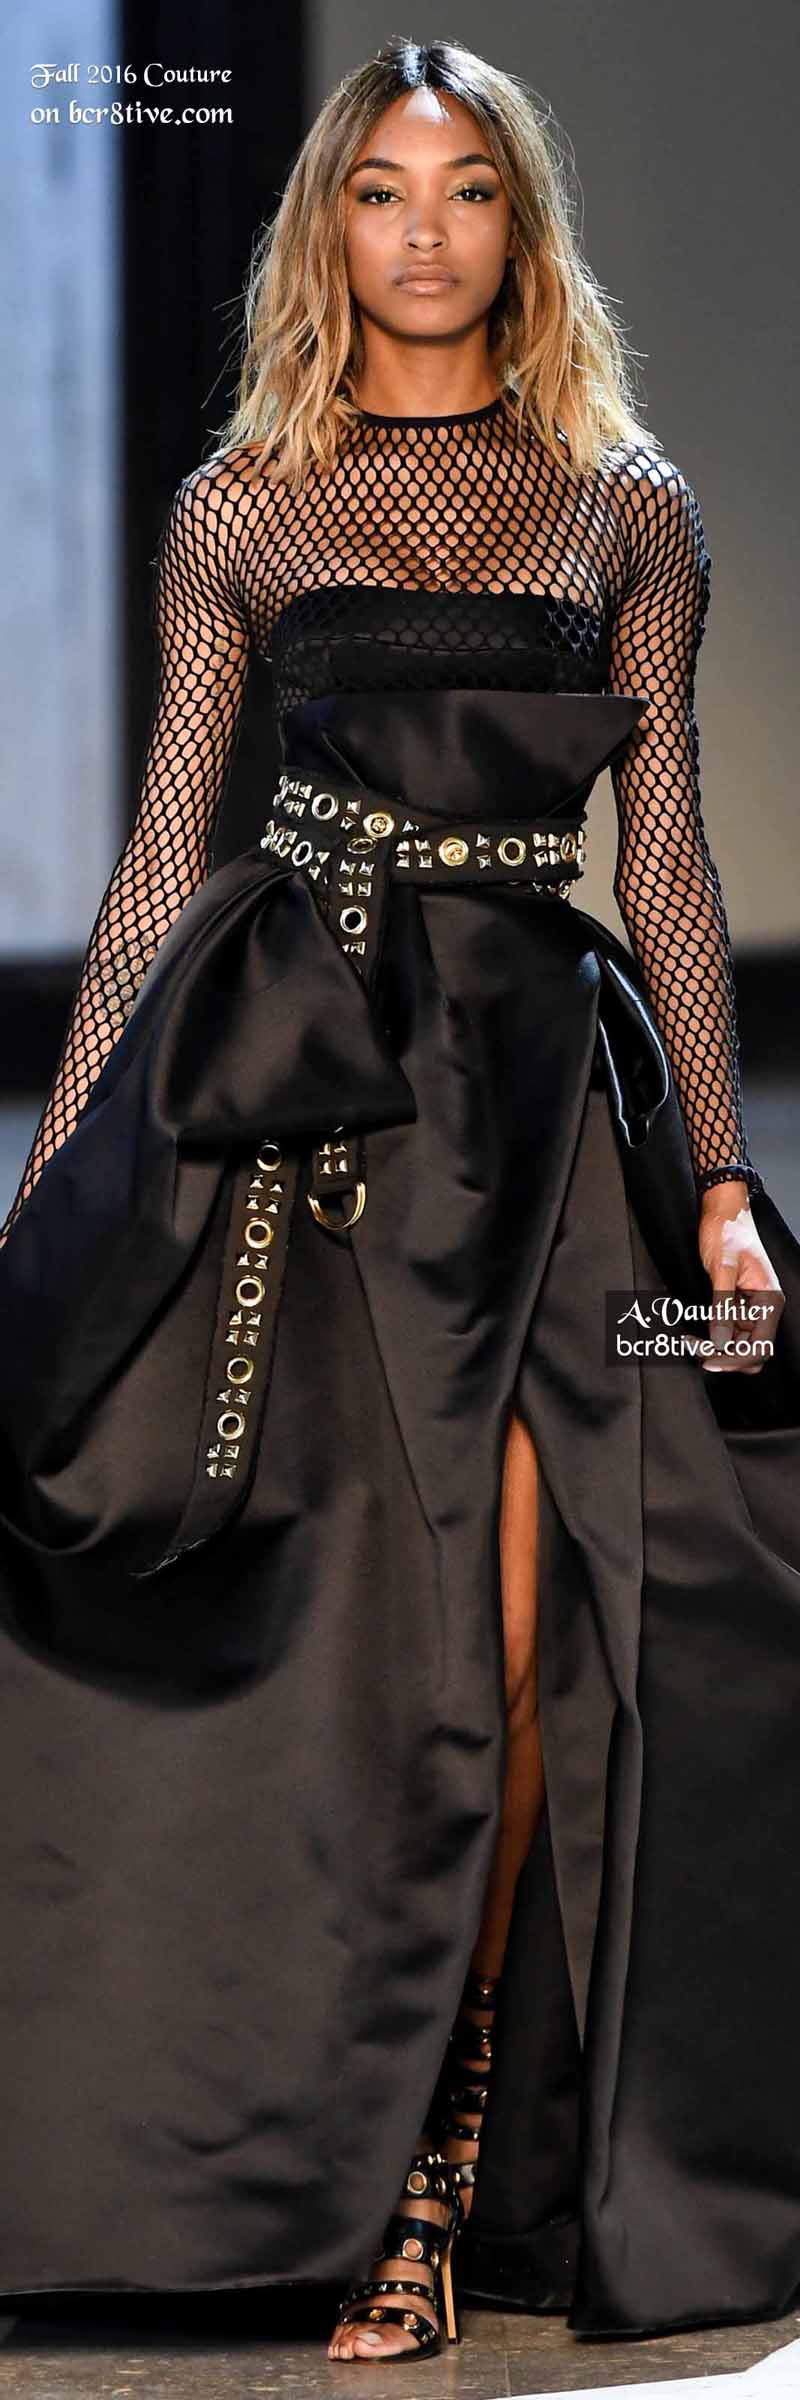 Alexandre Vauthier - The Best Fall 2016 Haute Couture Fashion